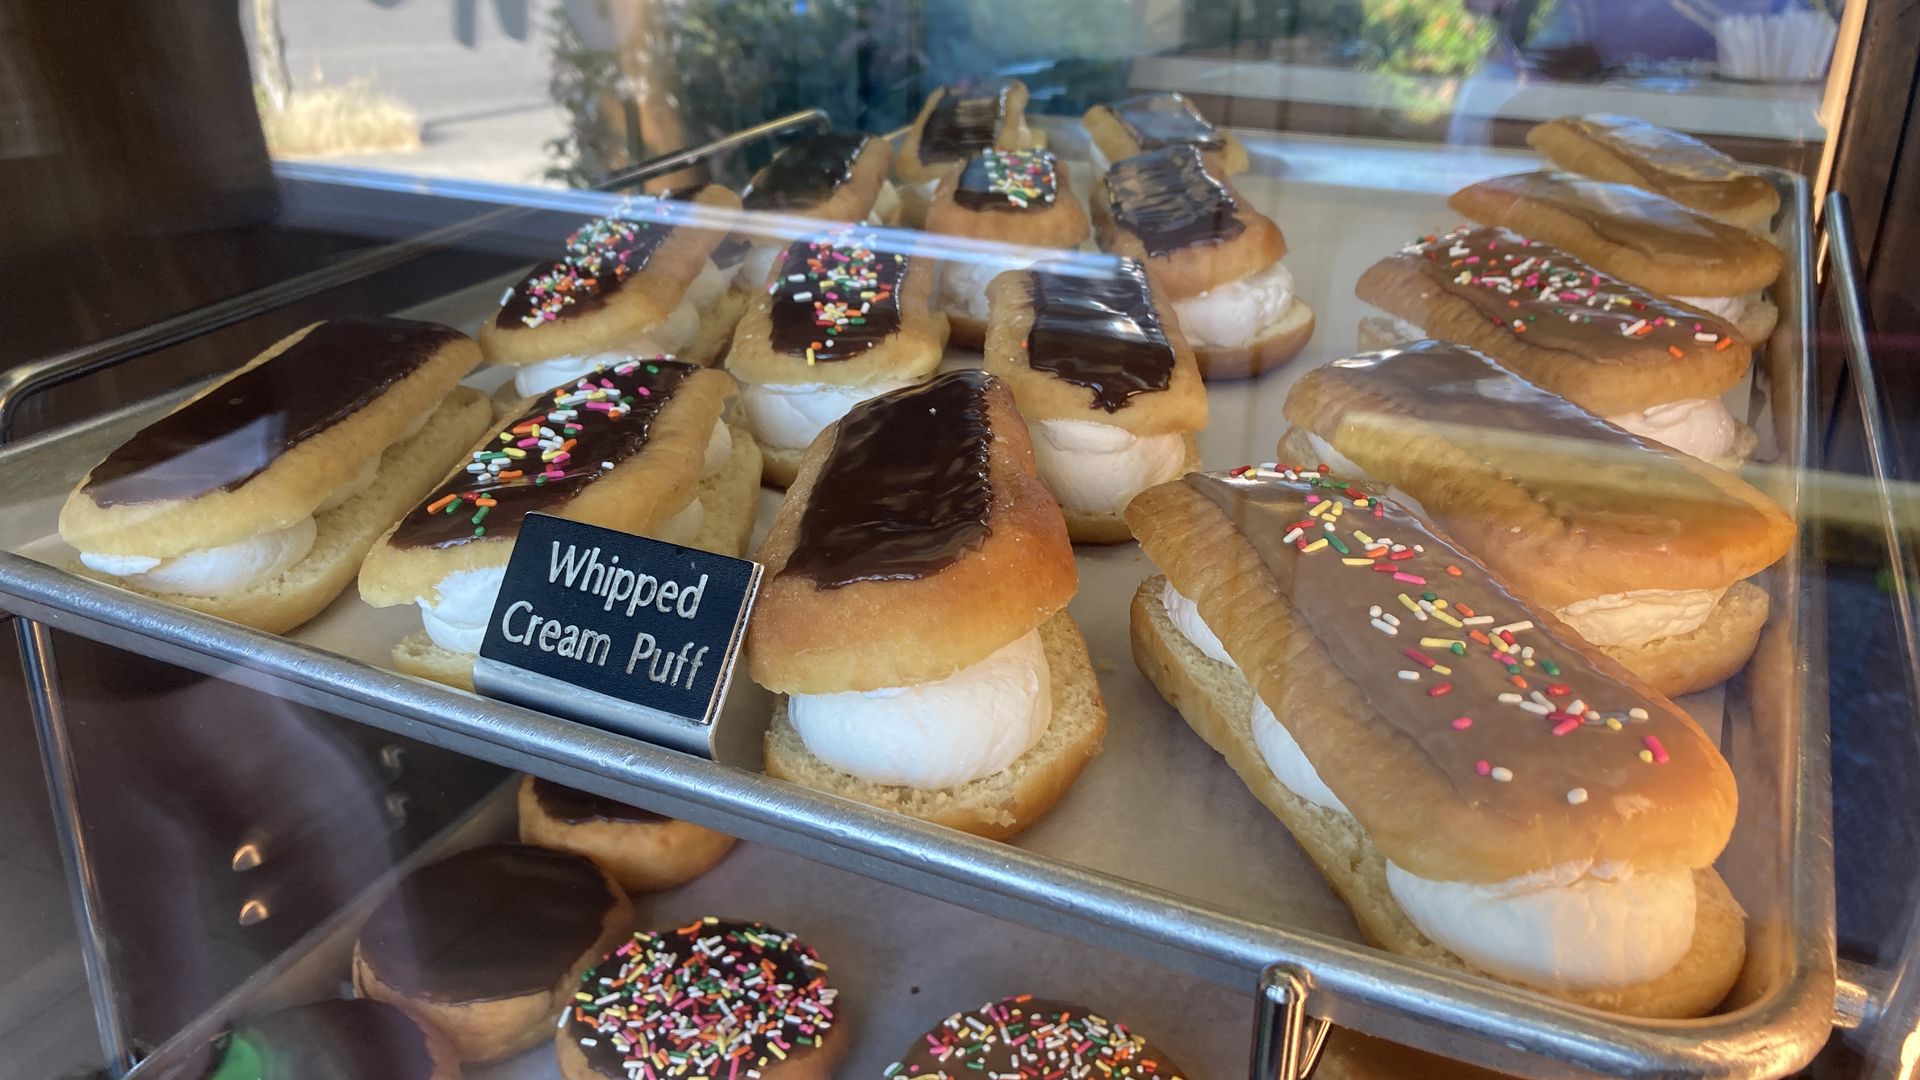 A glass case with a variety of doughnuts displayed.